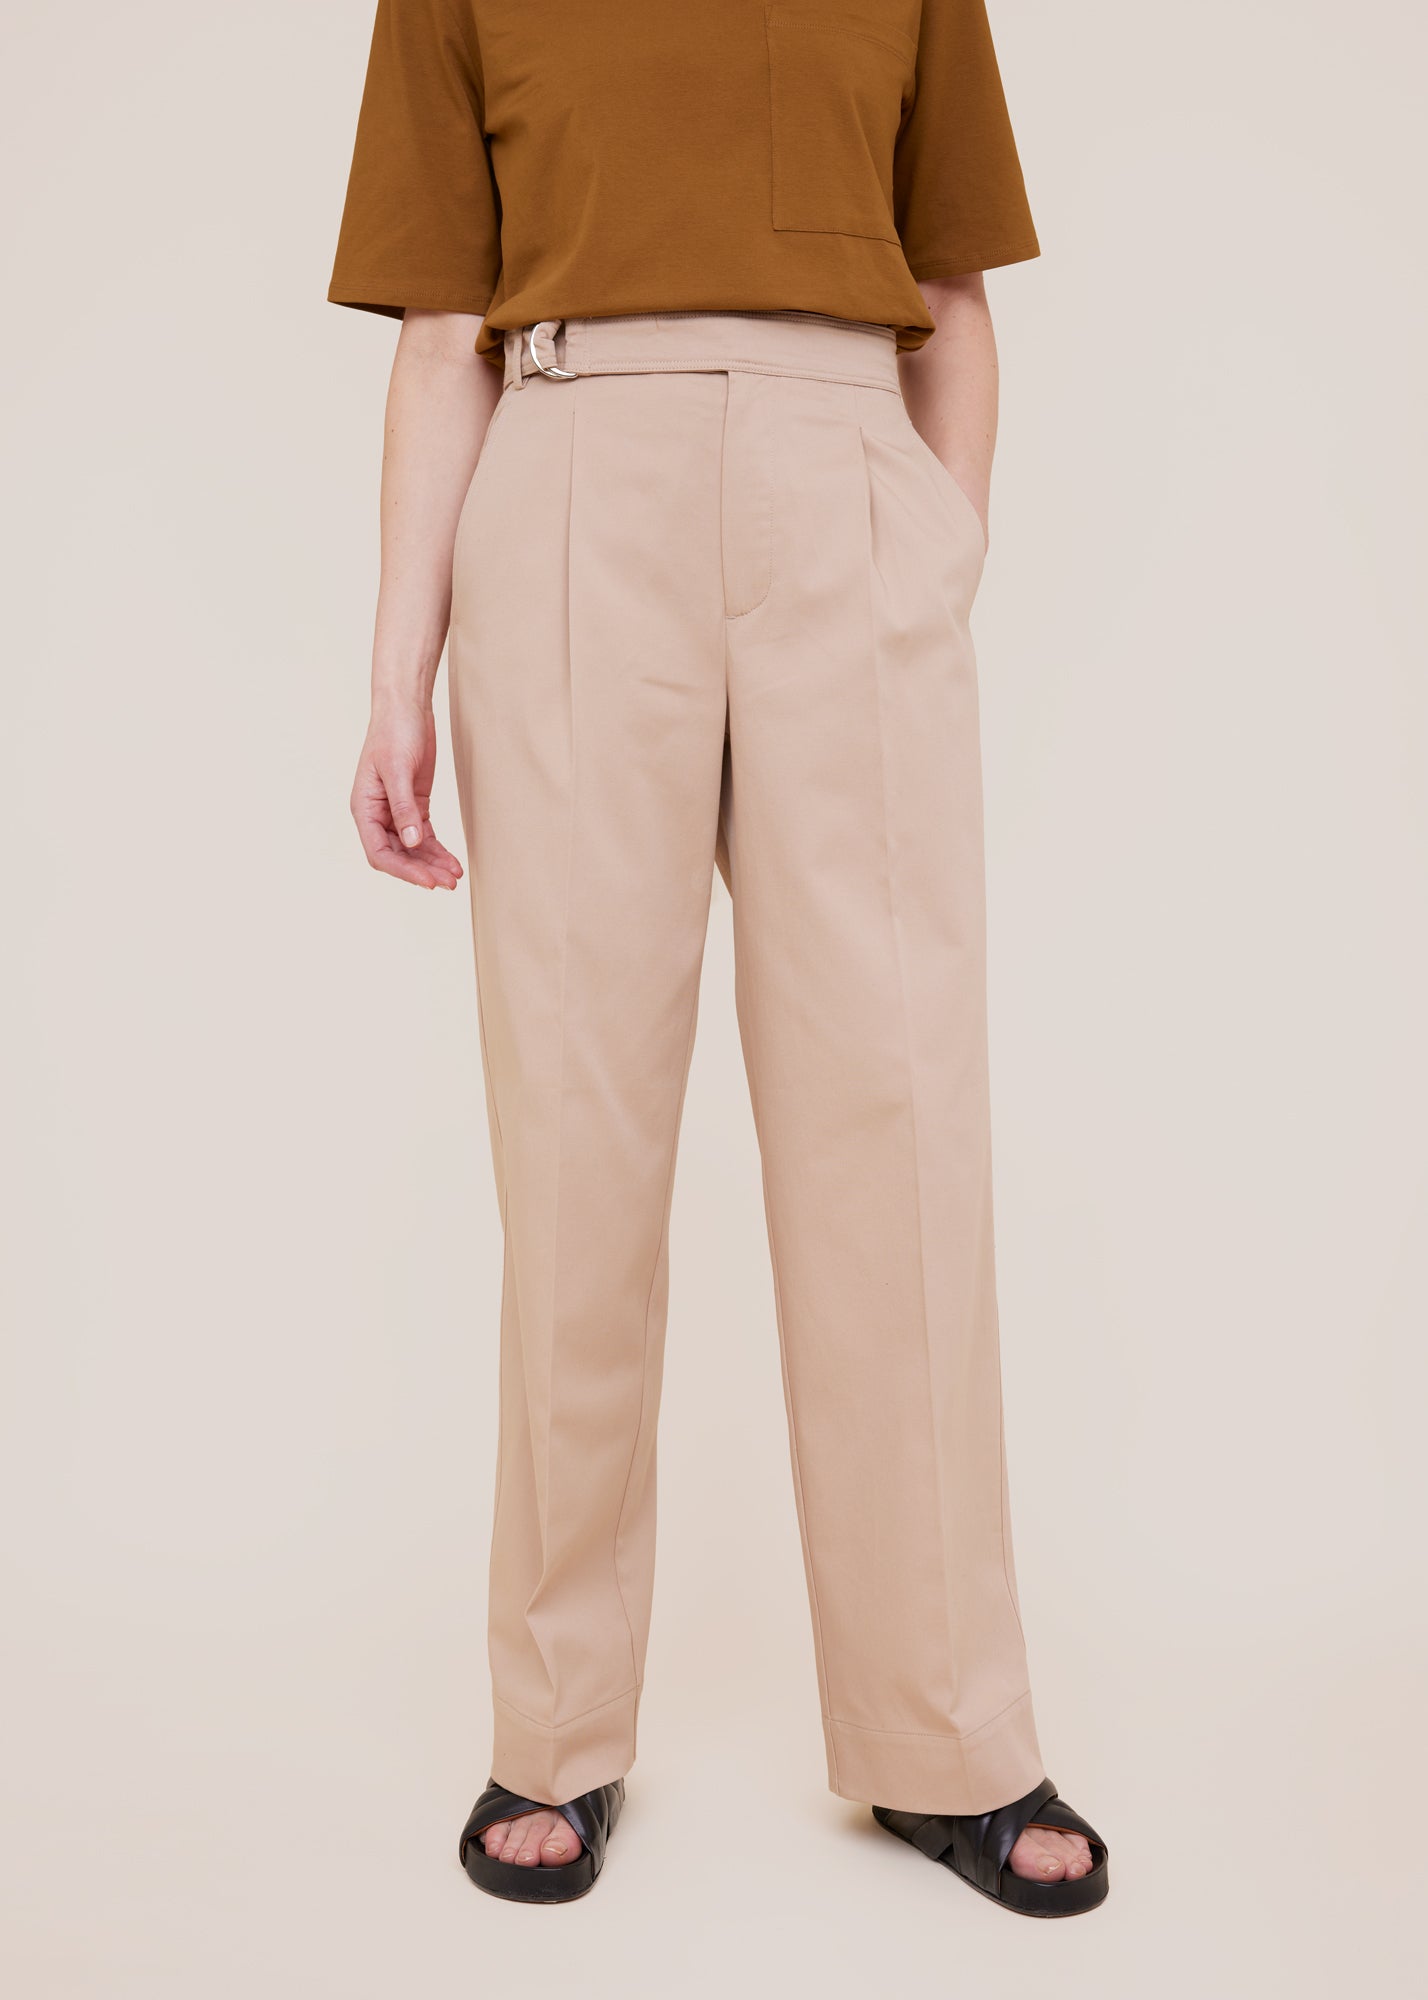 pleated-twill-trousers_179-36